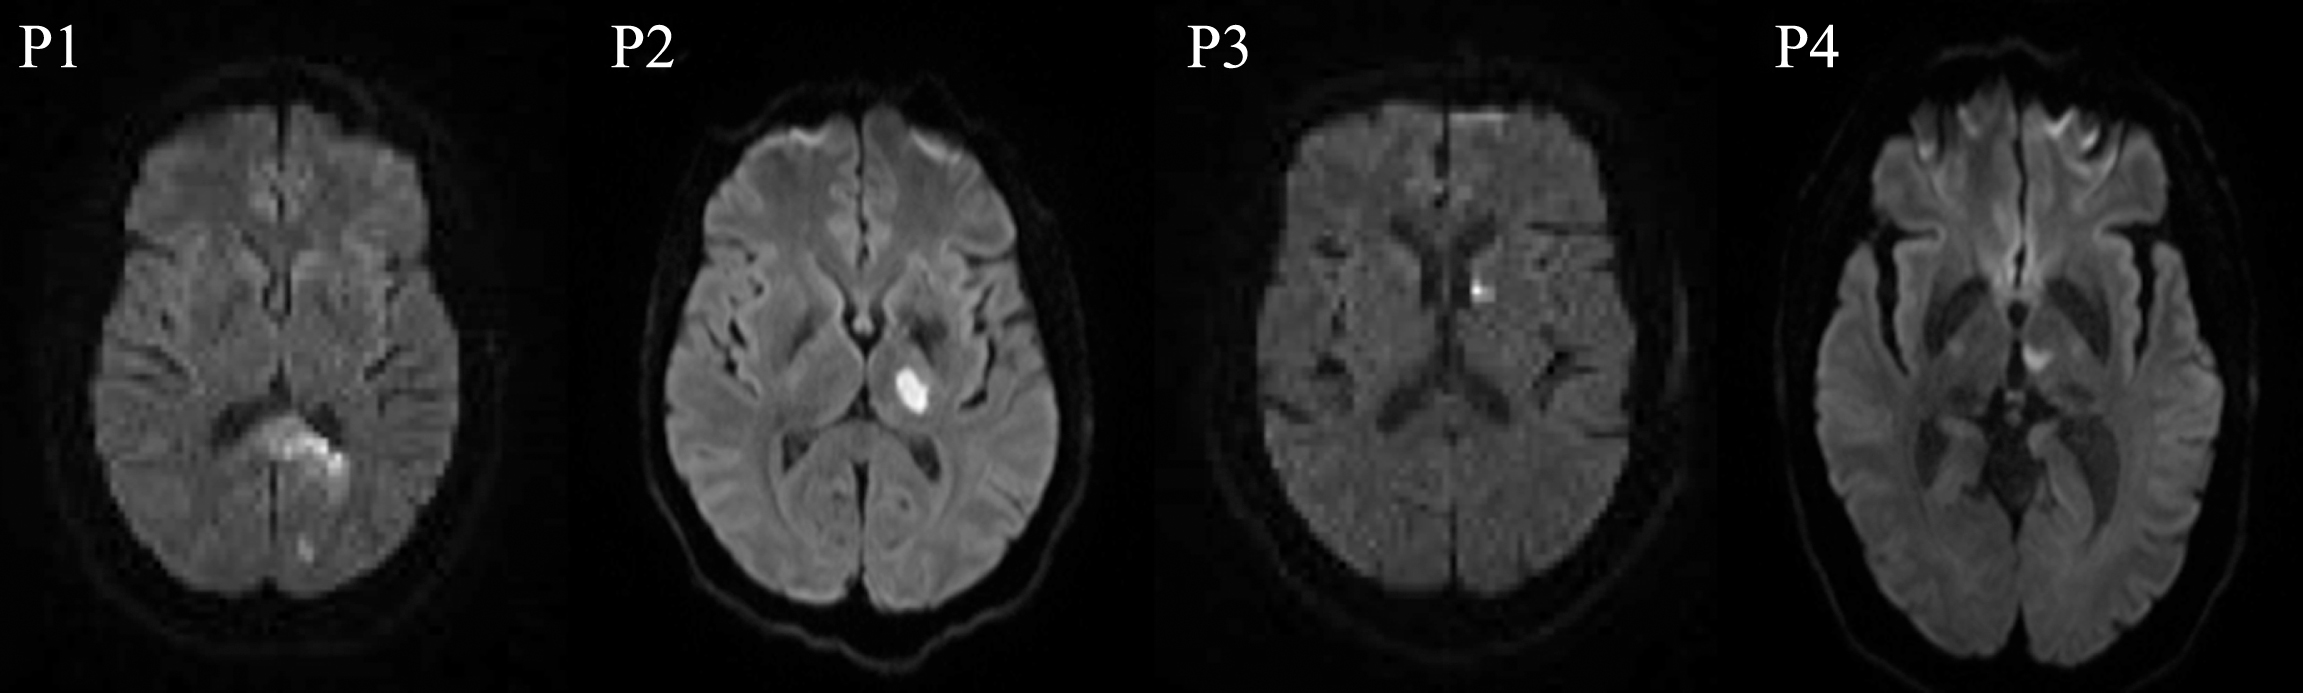 DWI scans at the acute time point for P1with a lesion in the left occipital, fusiform, lingual gyrus, and splenium; P2, P3, and P4 with lesions in the left thalamus.